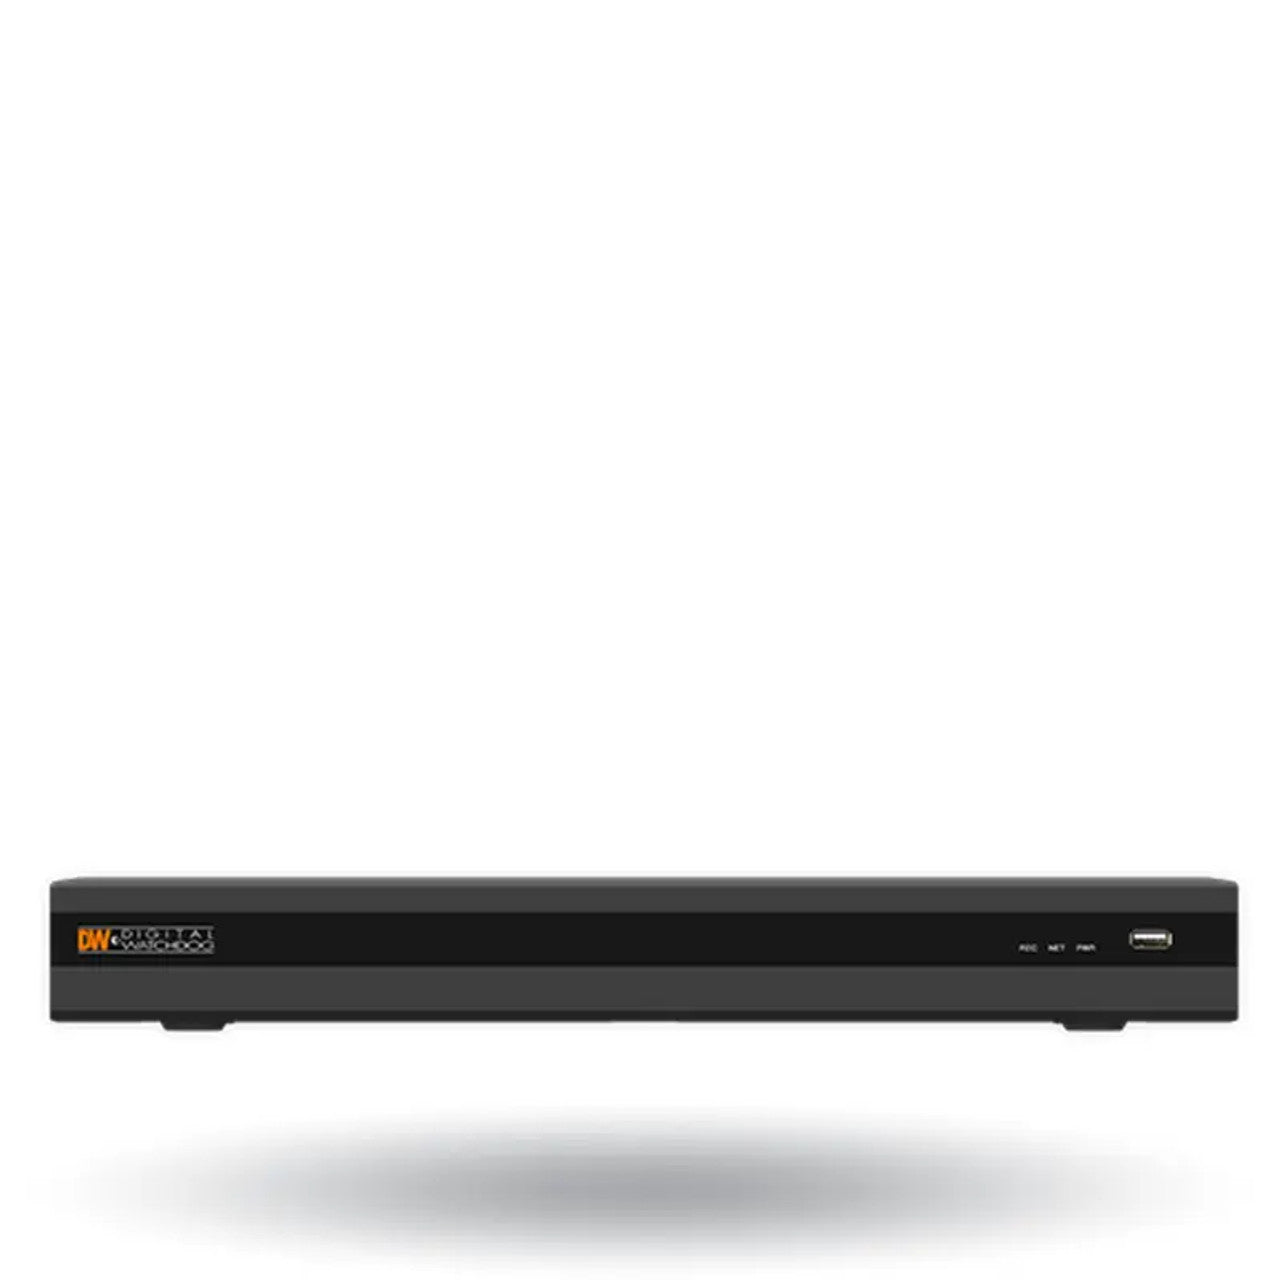 Digital Watchdog DW-VG41210T8P VMAX IP G4 8 Channel PoE NVR with 4 bonus channels with 10TB Hard Drive, 12-Channel